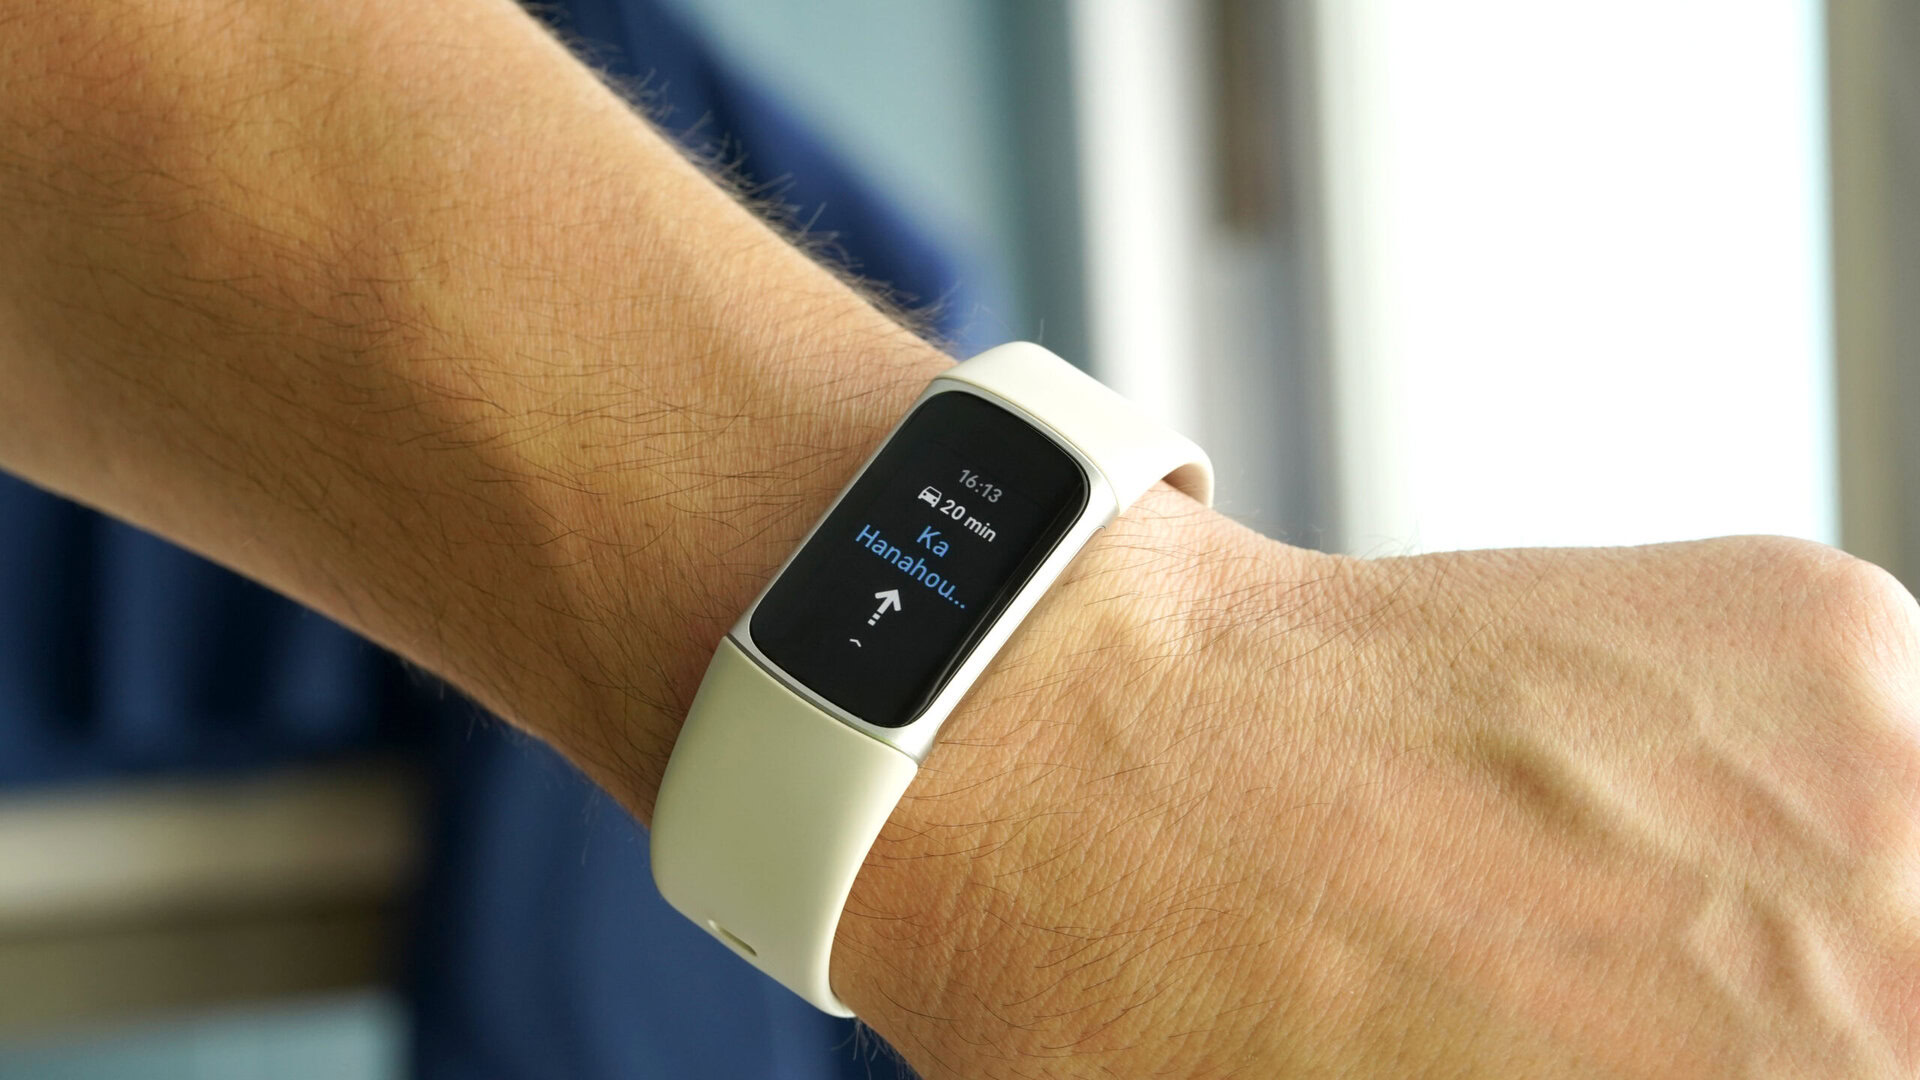 Sync Solver bridges the gap between Apple's Health app and Fitbit devices